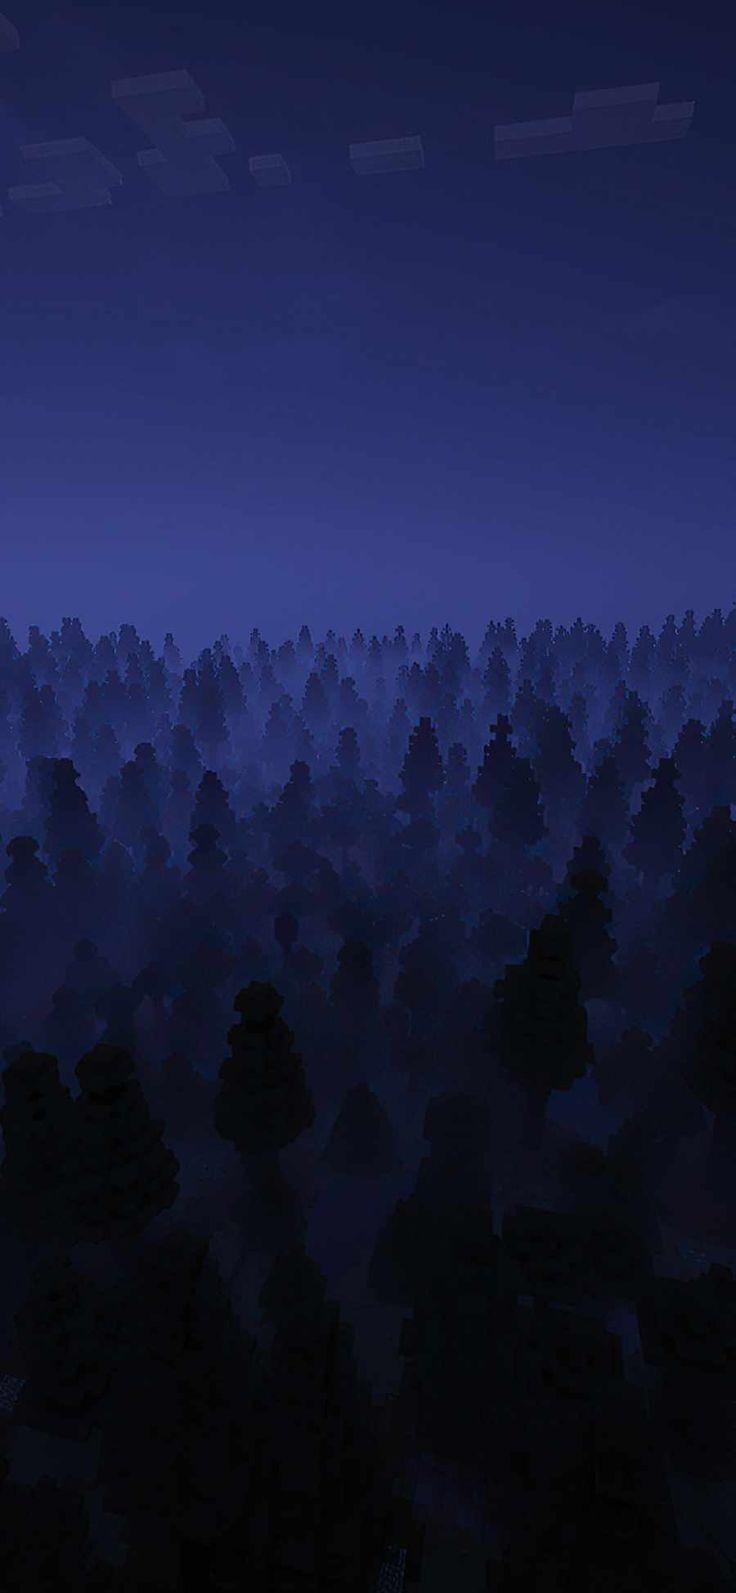 Blue Fog Over The Dark Forest iPhone Wallpaper